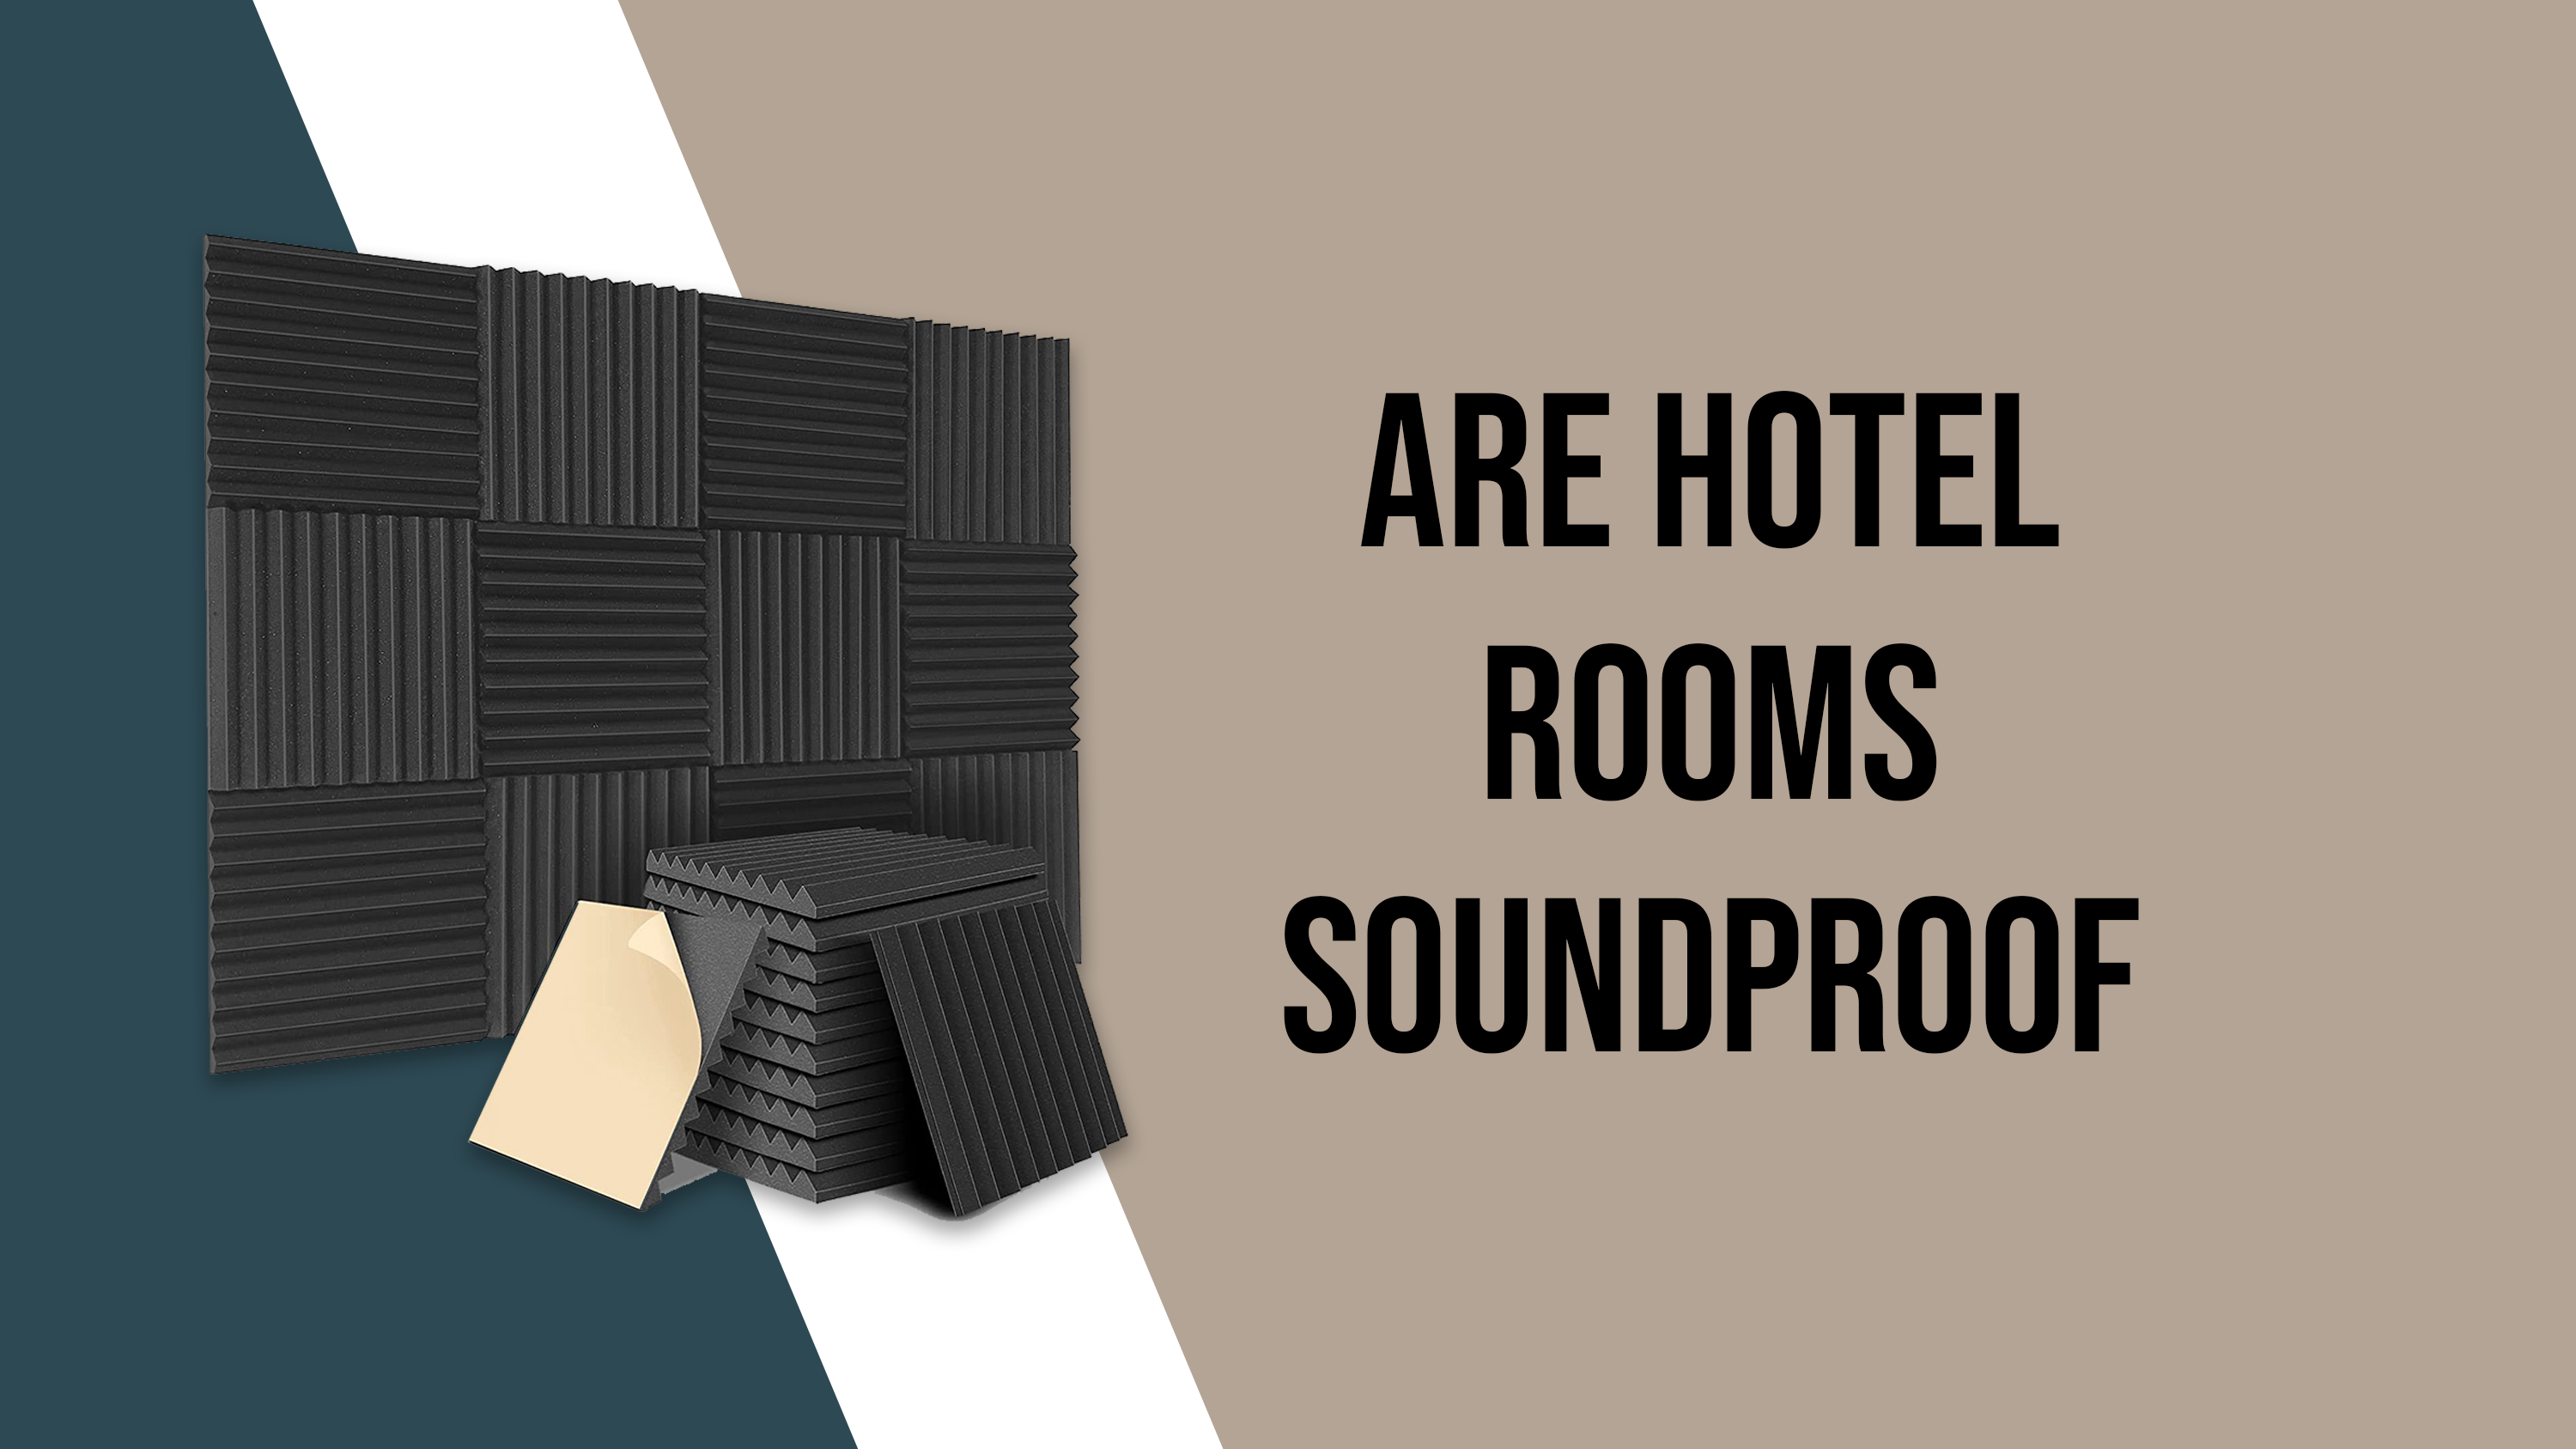 Are hotel room soundproof